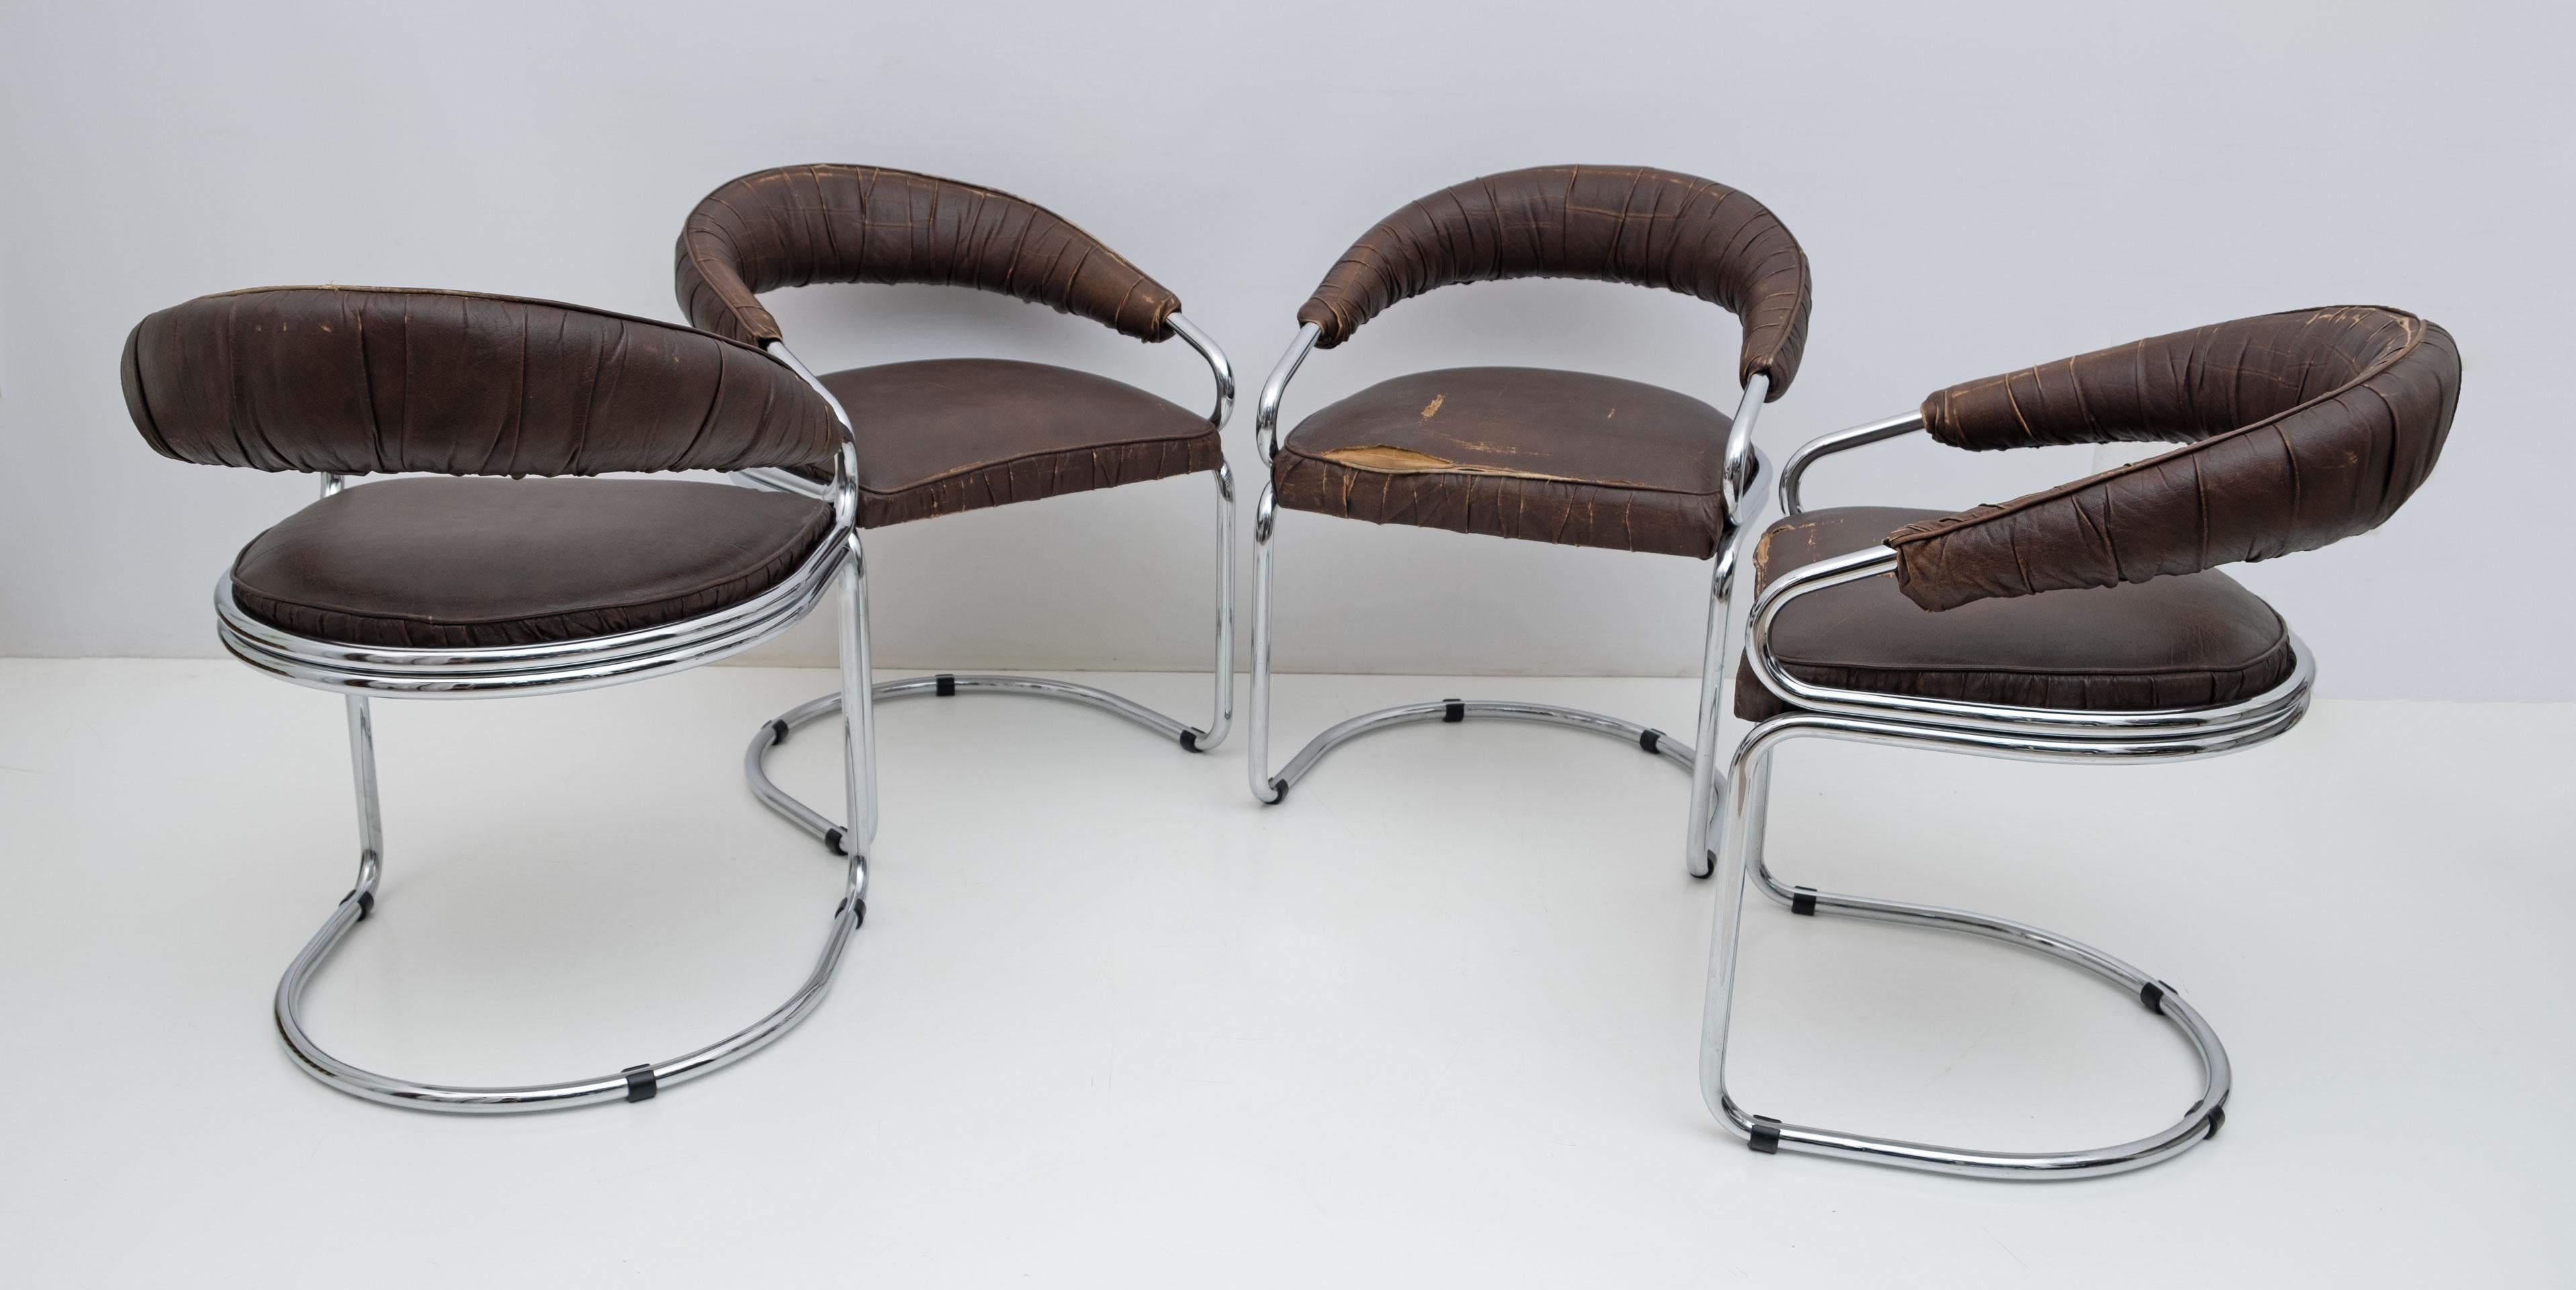 Set of 4 curved chairs in eco-leather with chromed tubular structure. These chairs, as shown in the photos, need a new upholstery, while the structure is in excellent condition and the chrome plating too; considering they are almost 50 years old.